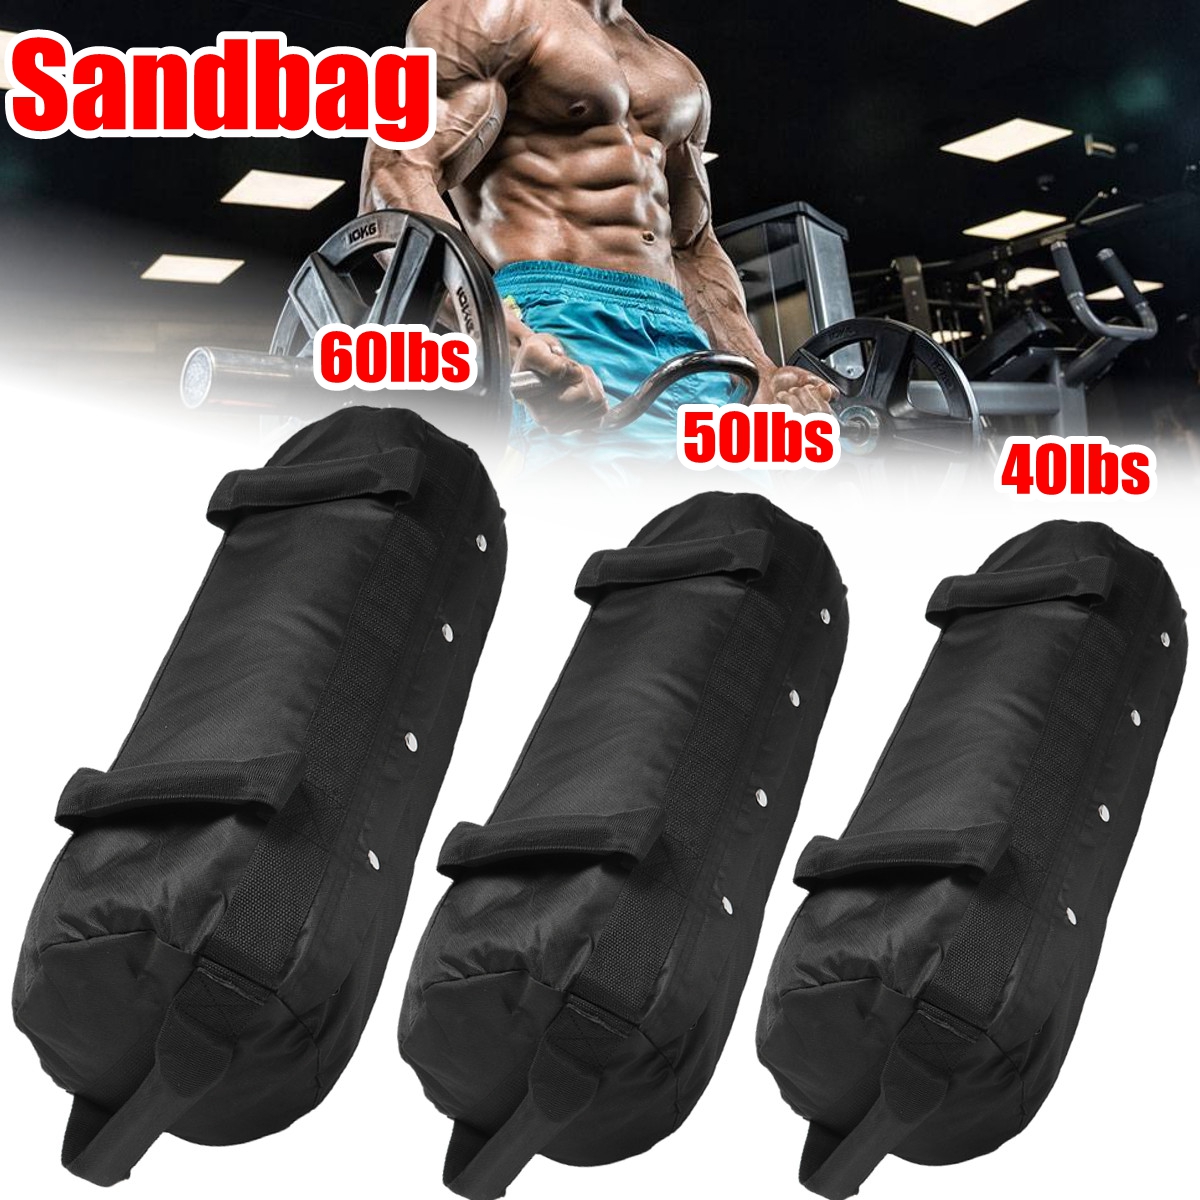 405060-Ibs-Adjustable-Weightlifting-Sandbag-Fitness-Muscle-Training-Weight-Bag-Exercise-Tools-1592086-1